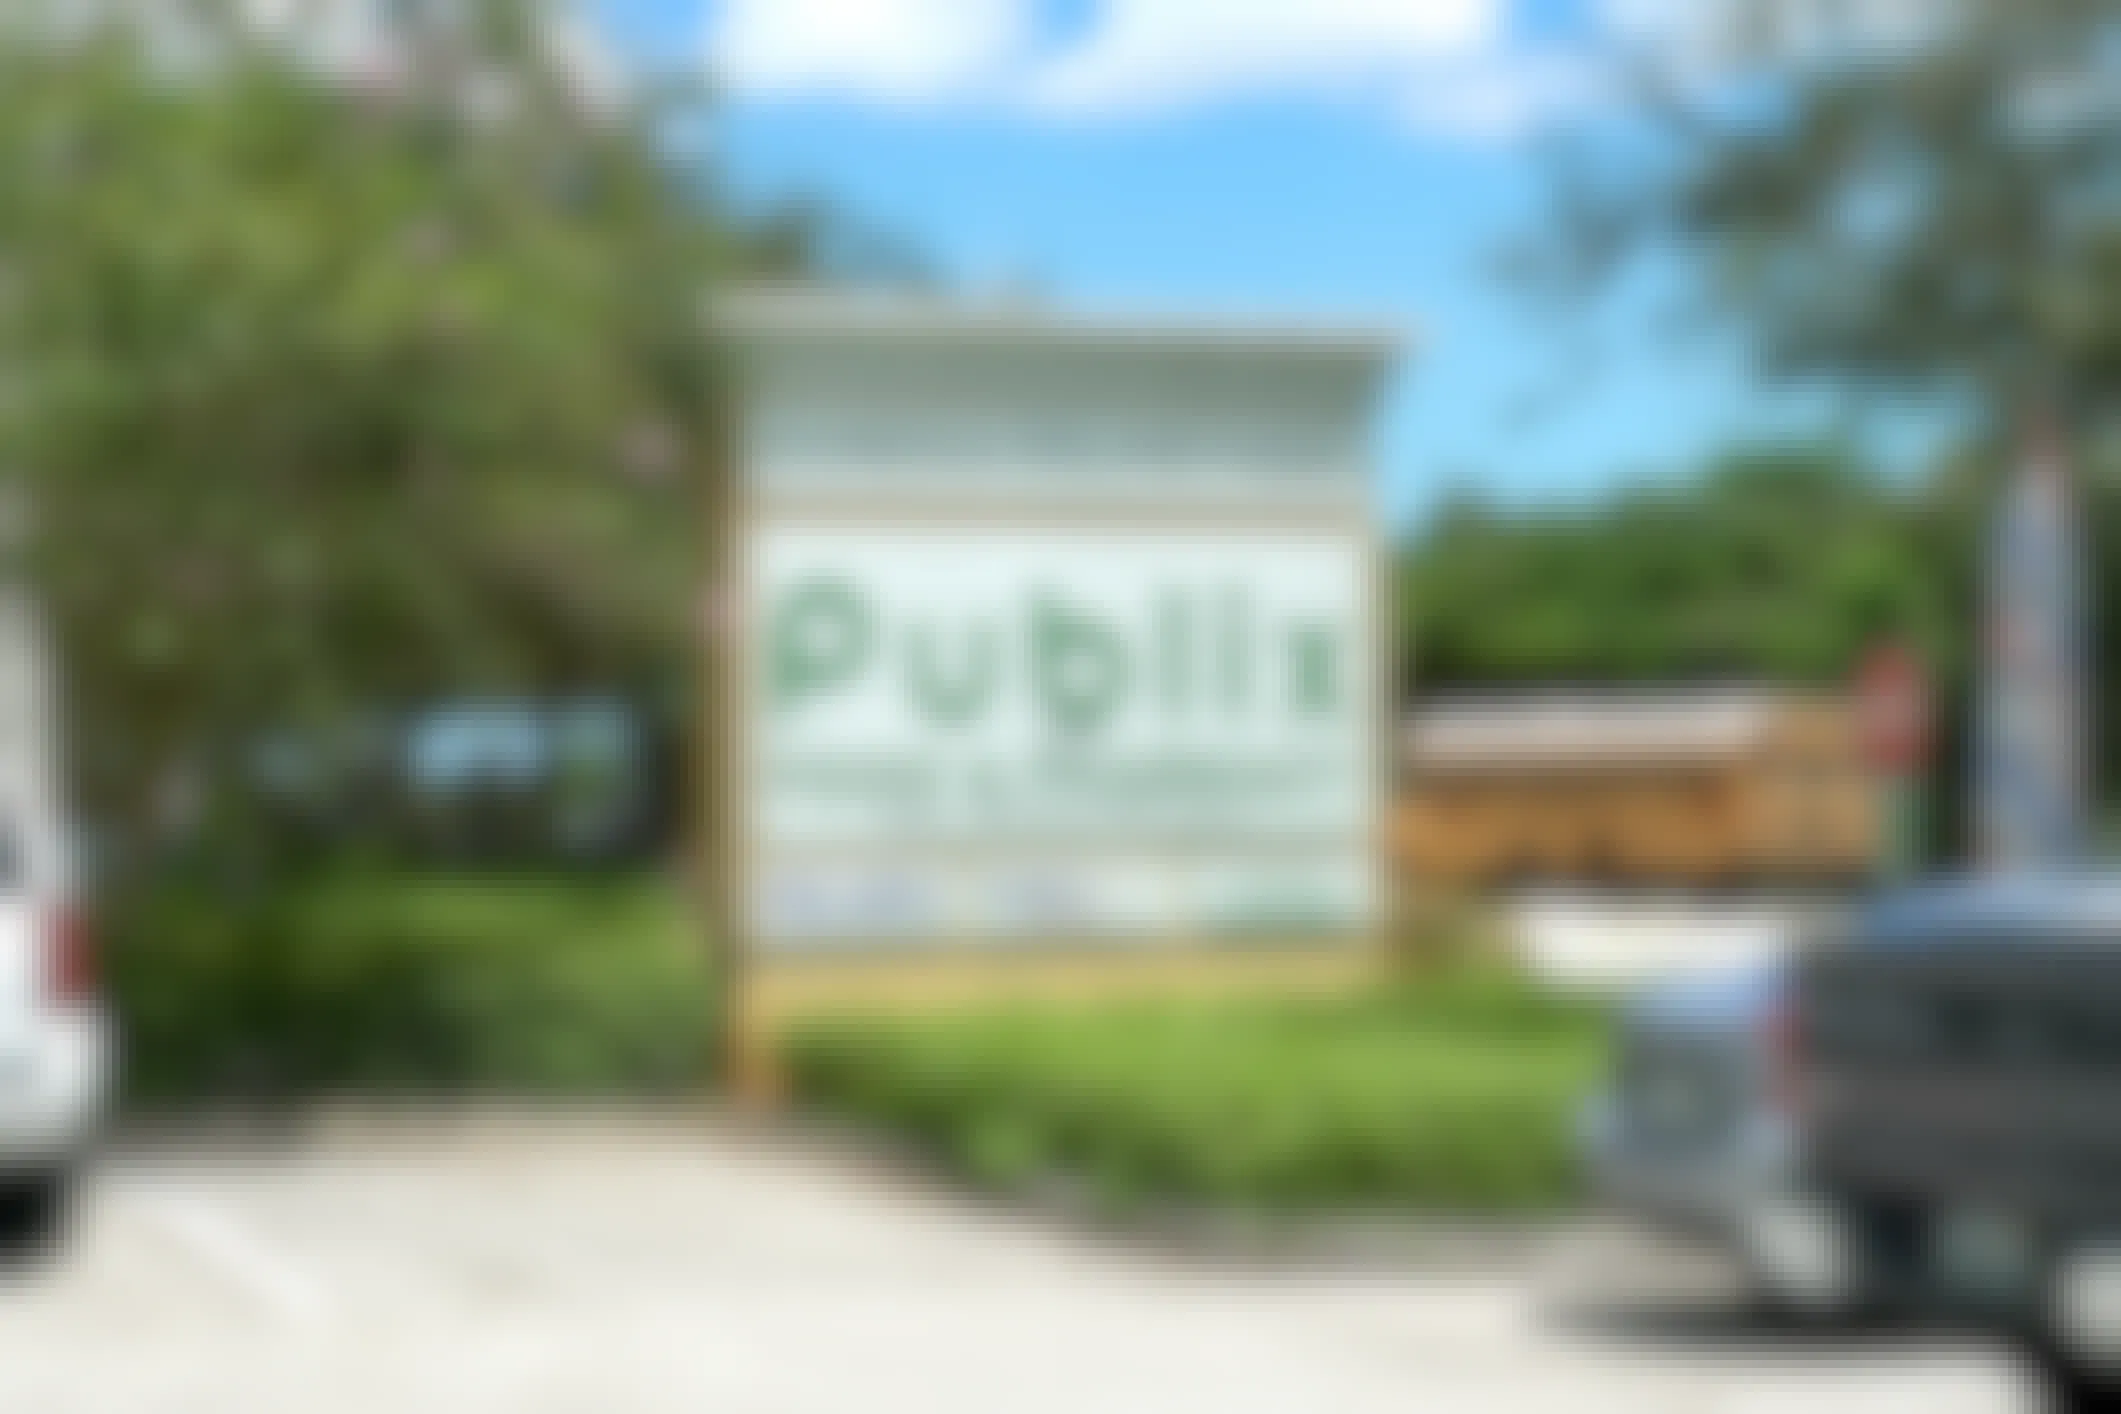 Publix Super Markets is an employee-owned, American supermarket chain headquartered in Lakeland, Florida.